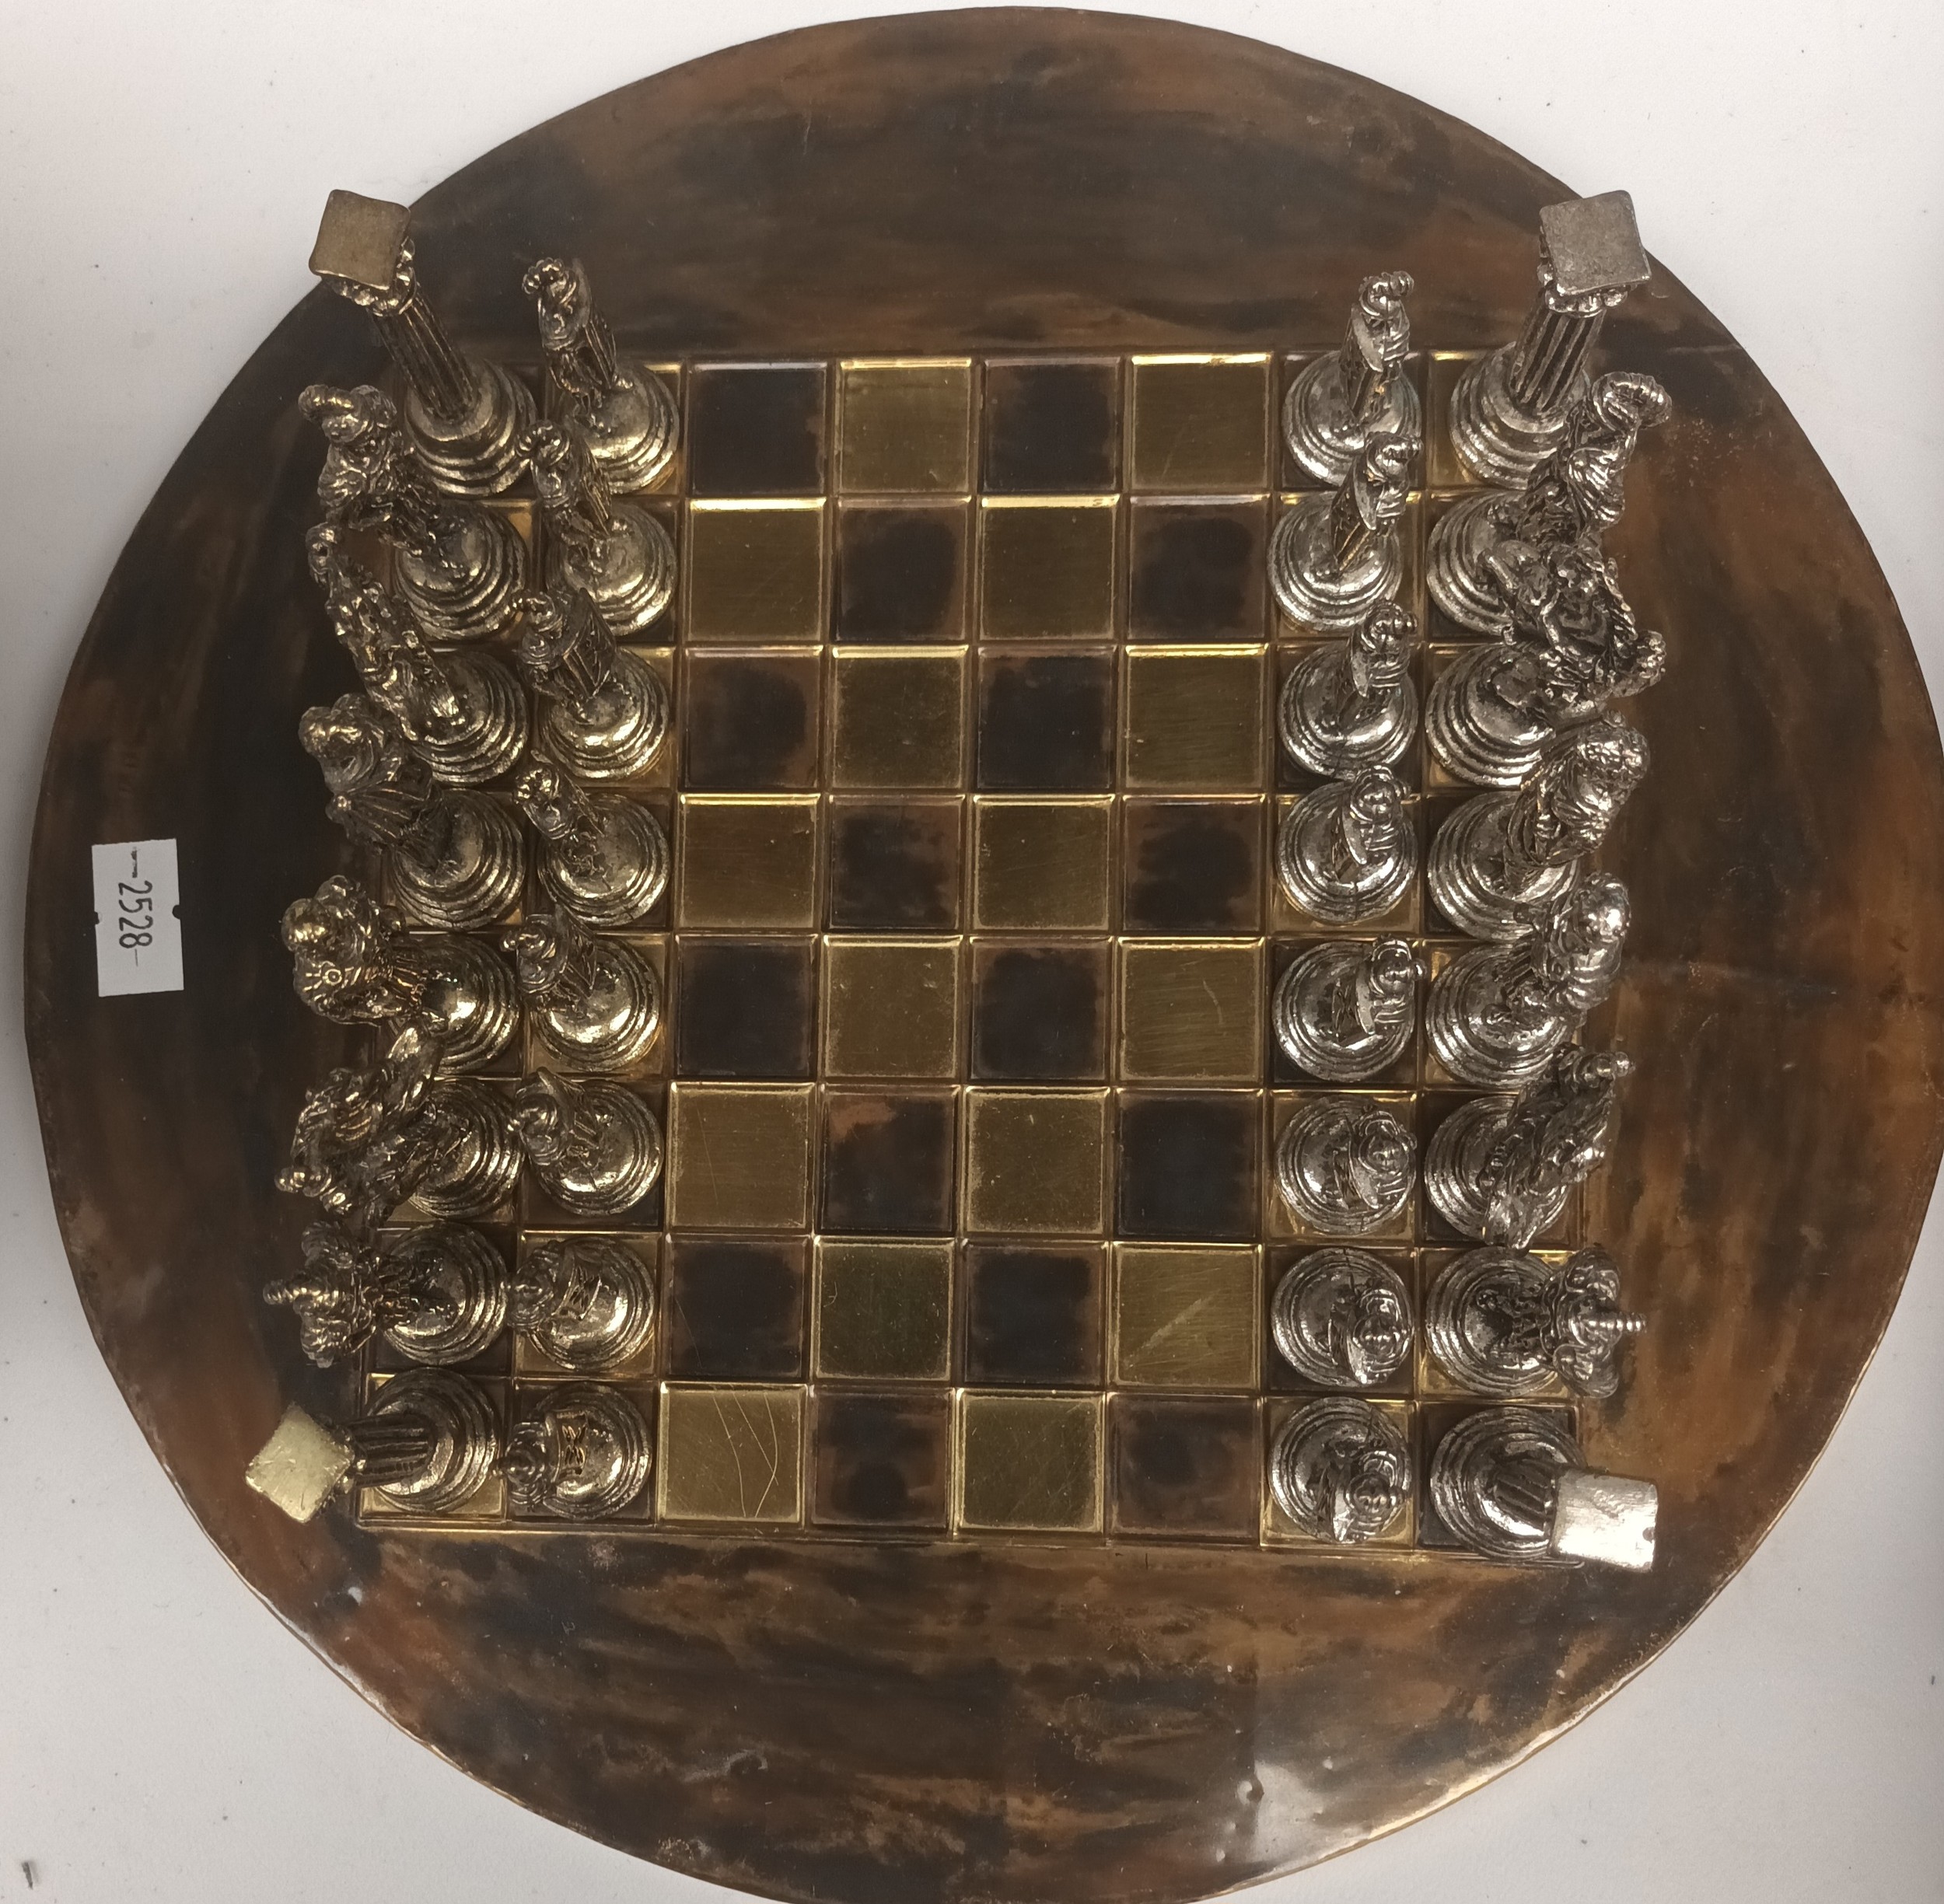 A Ornate Metal chess set with board along with A Large eastern themed blue & white preserve dish - Image 3 of 3